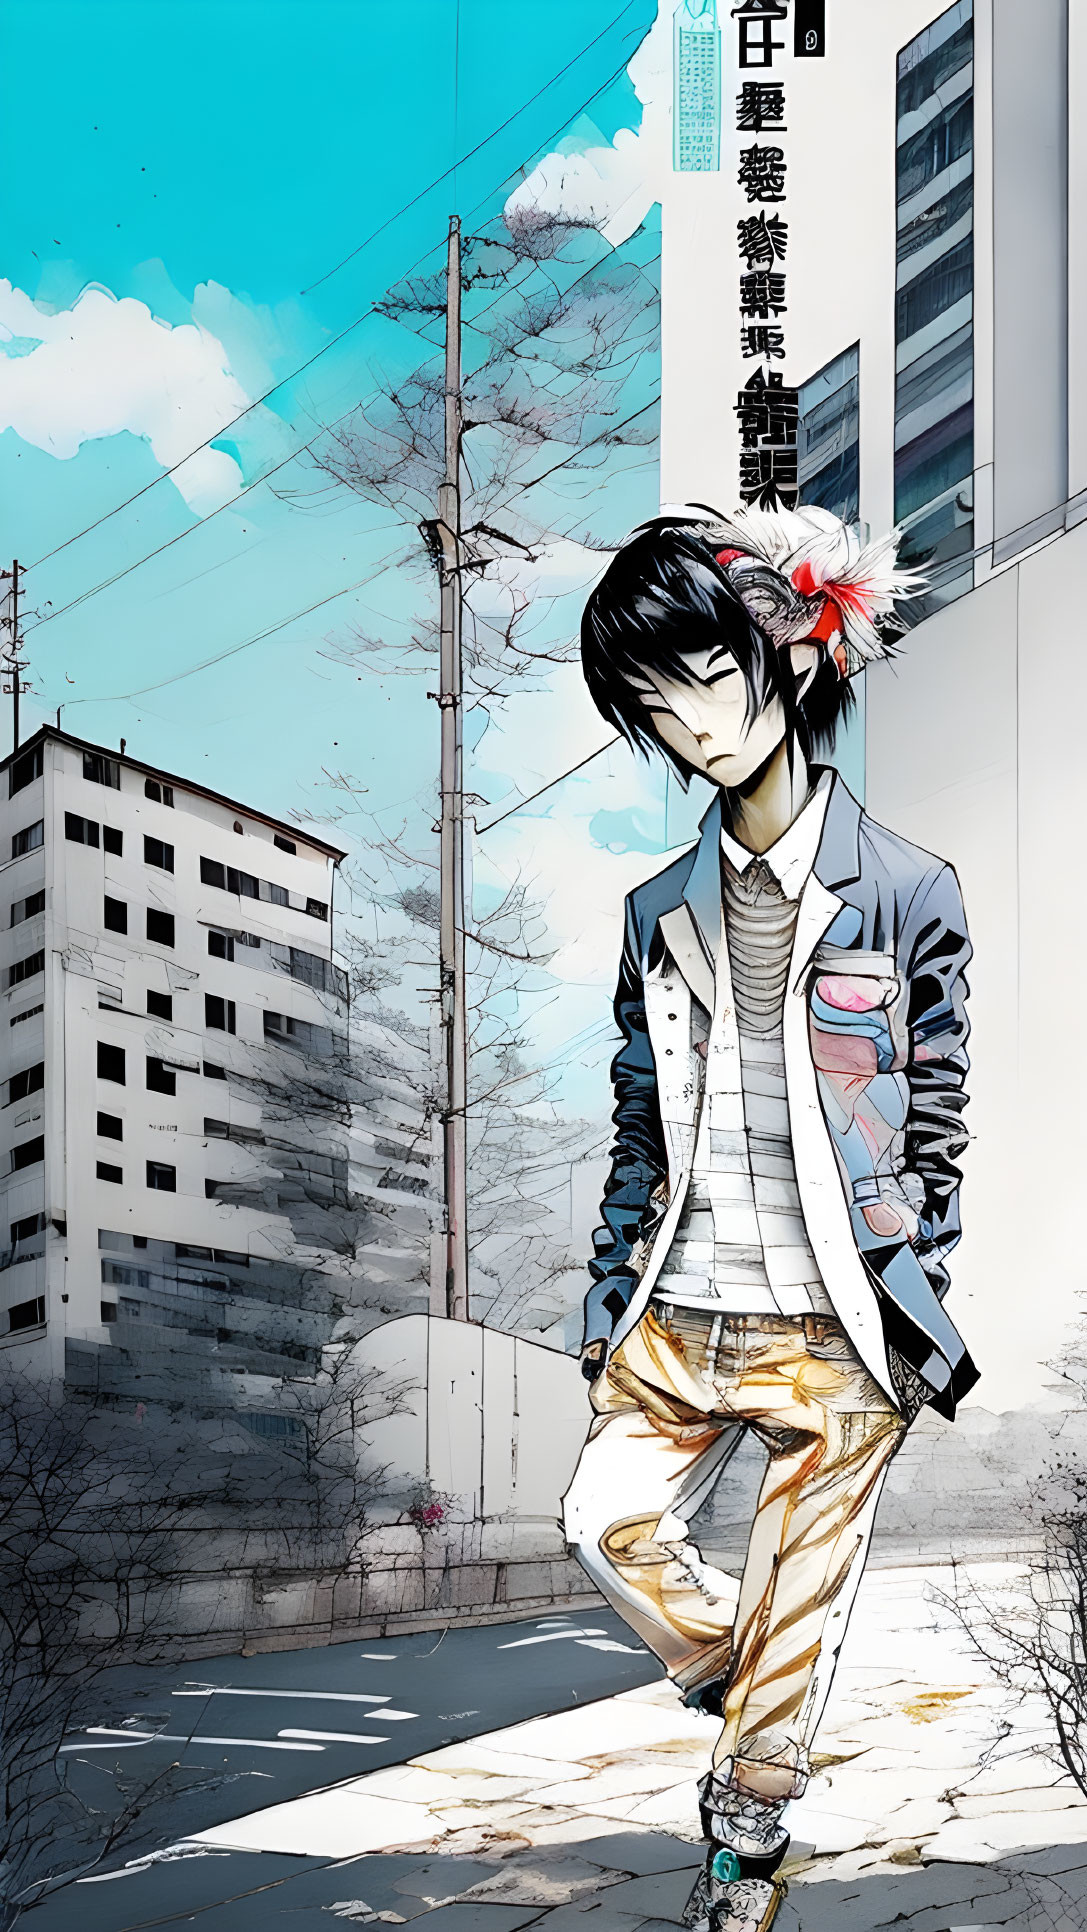 Male anime character with black and red hair in urban outfit under sunlight